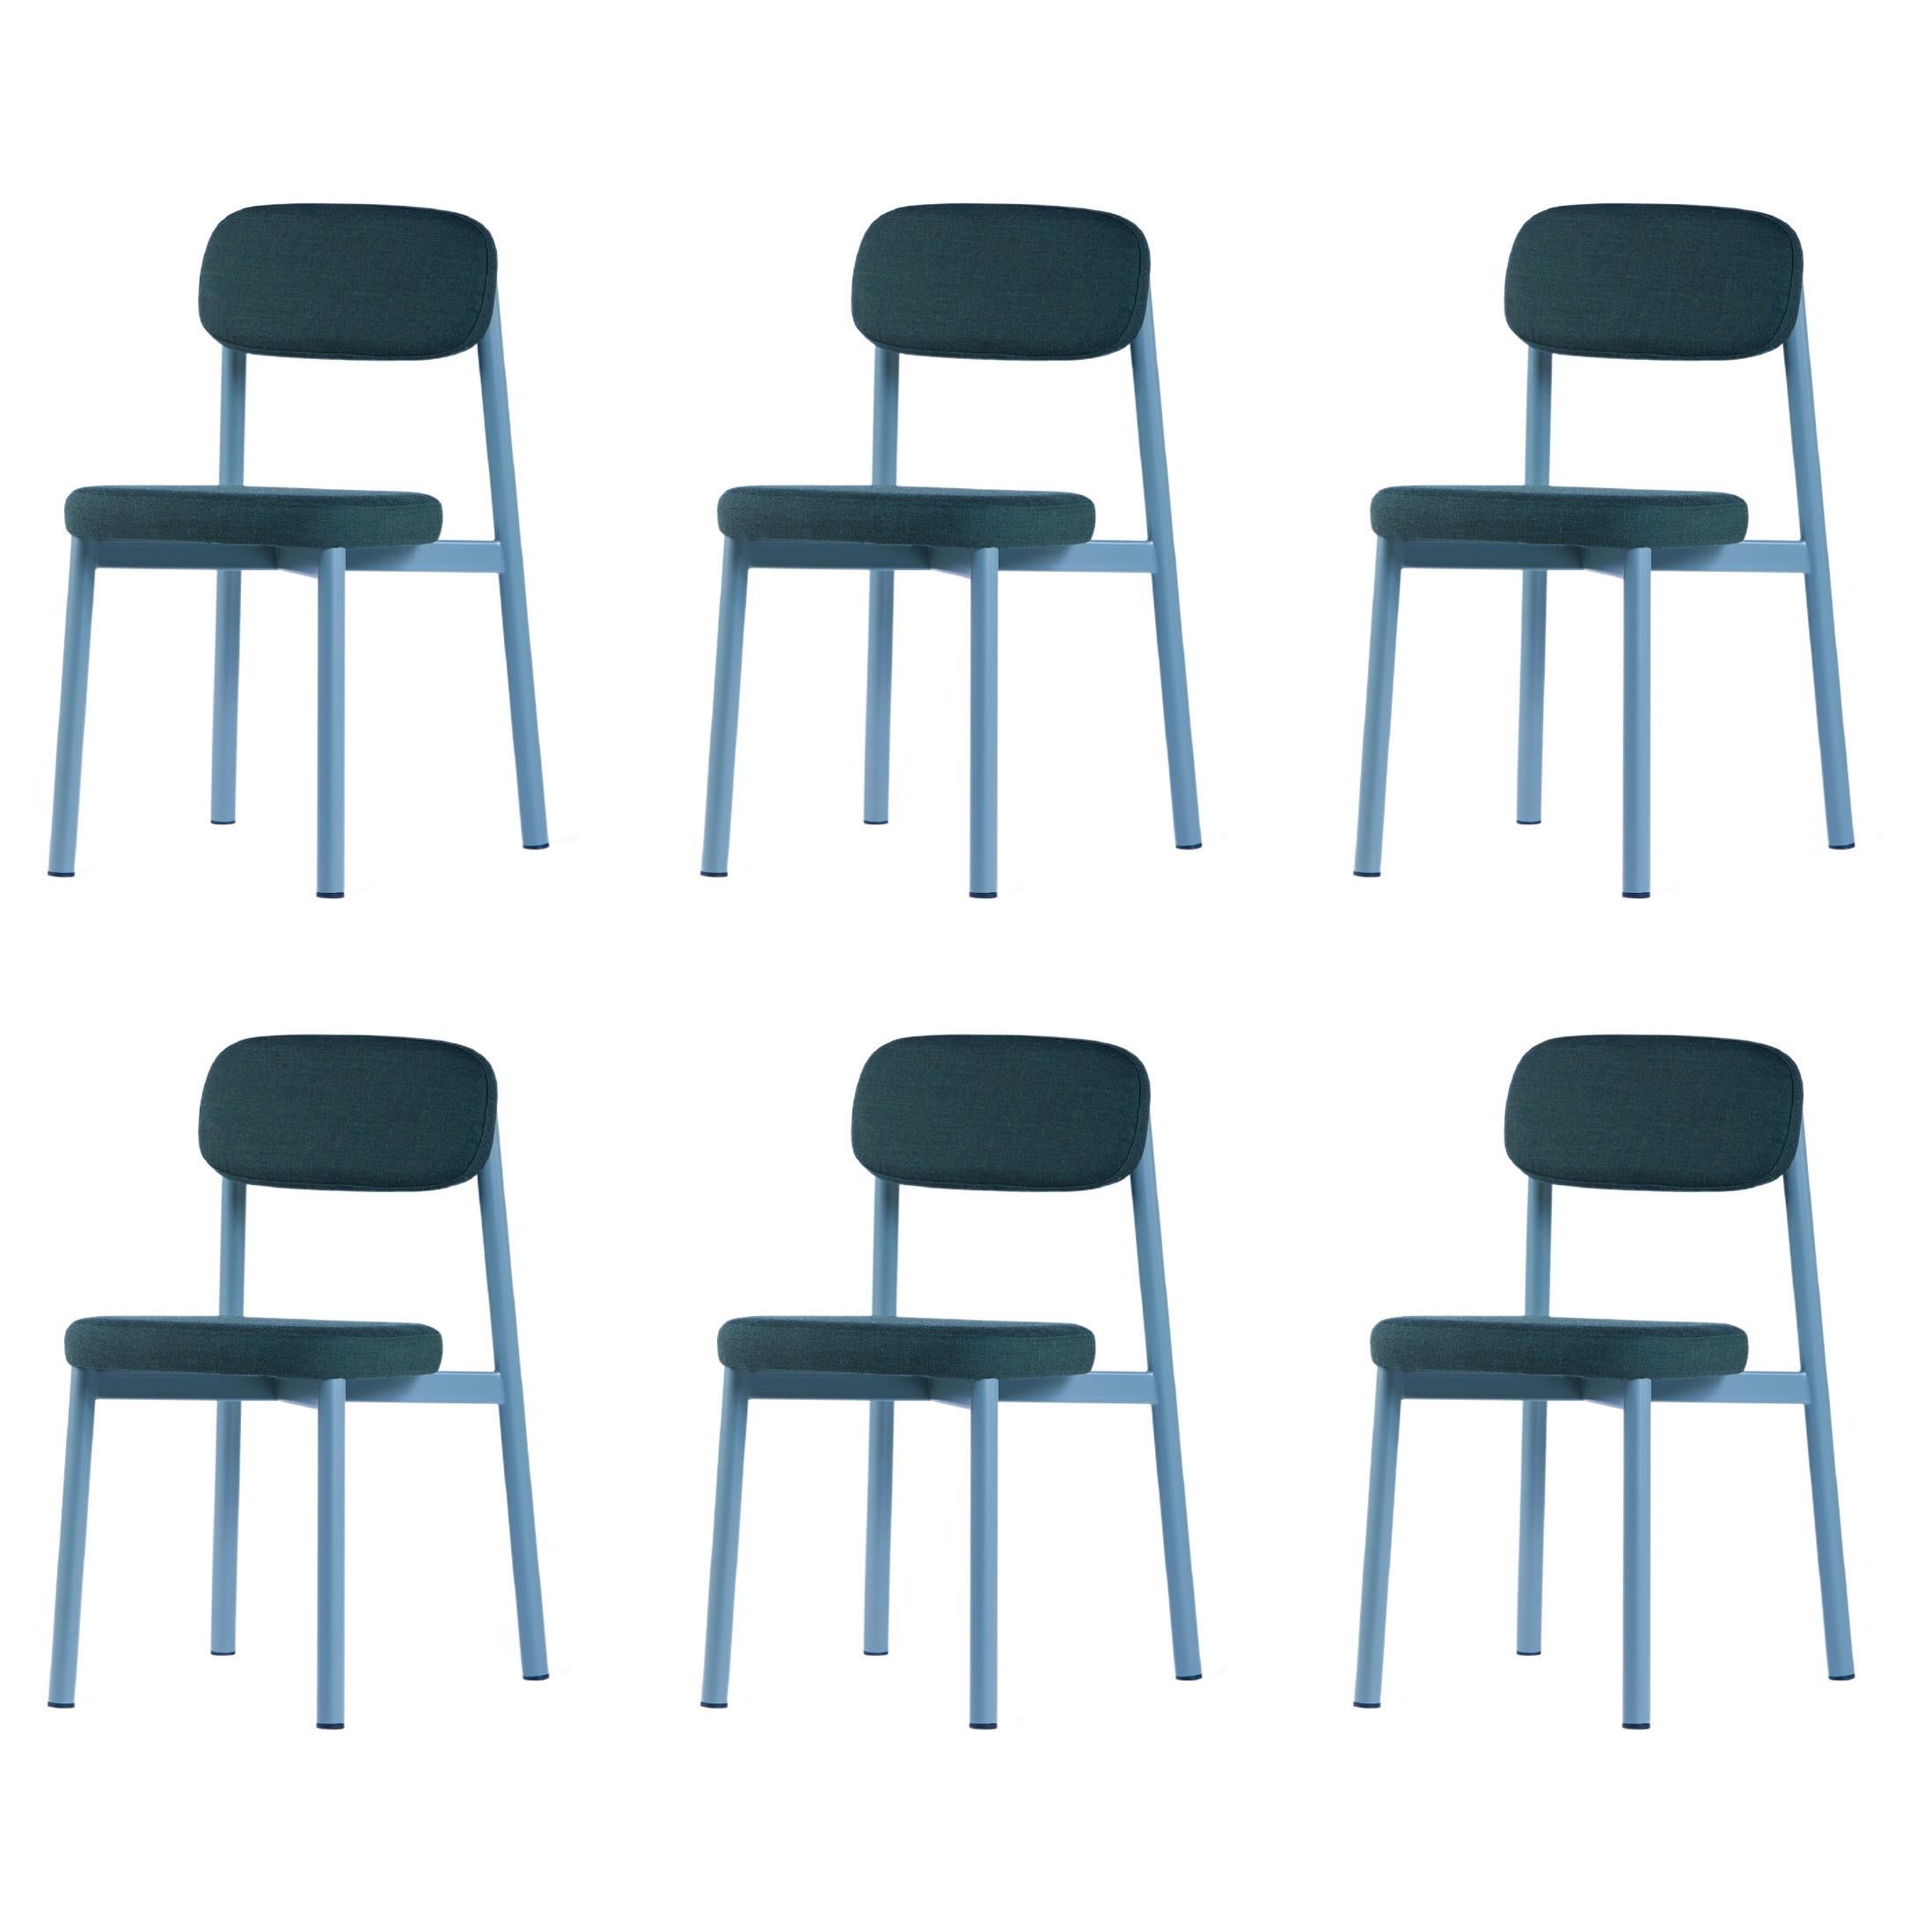 Set of 6 Green Residence Chairs by Kann Design For Sale